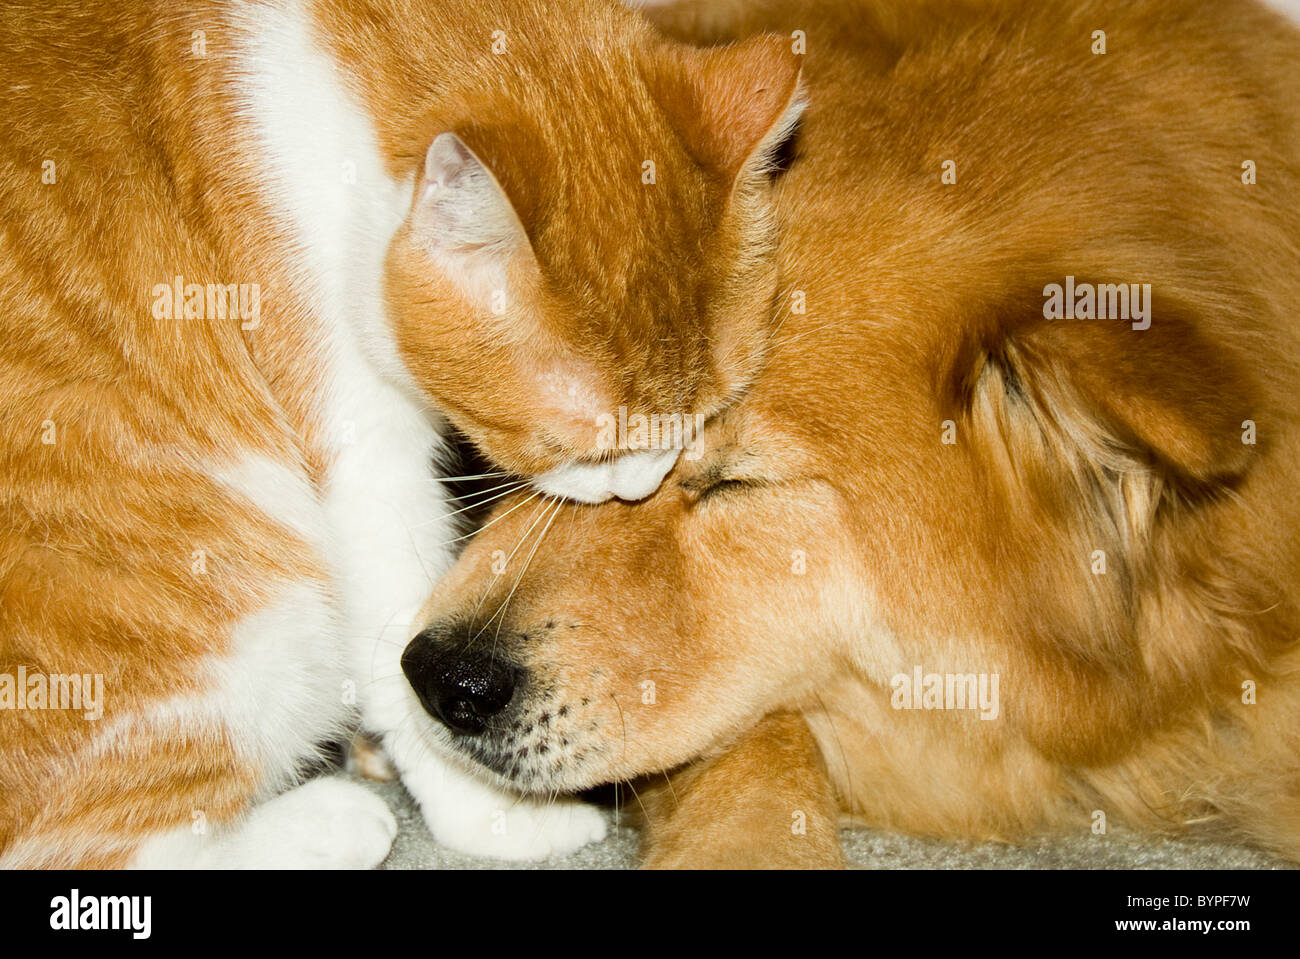 'Comforting Companions' - dog and cat cuddle up together Stock Photo